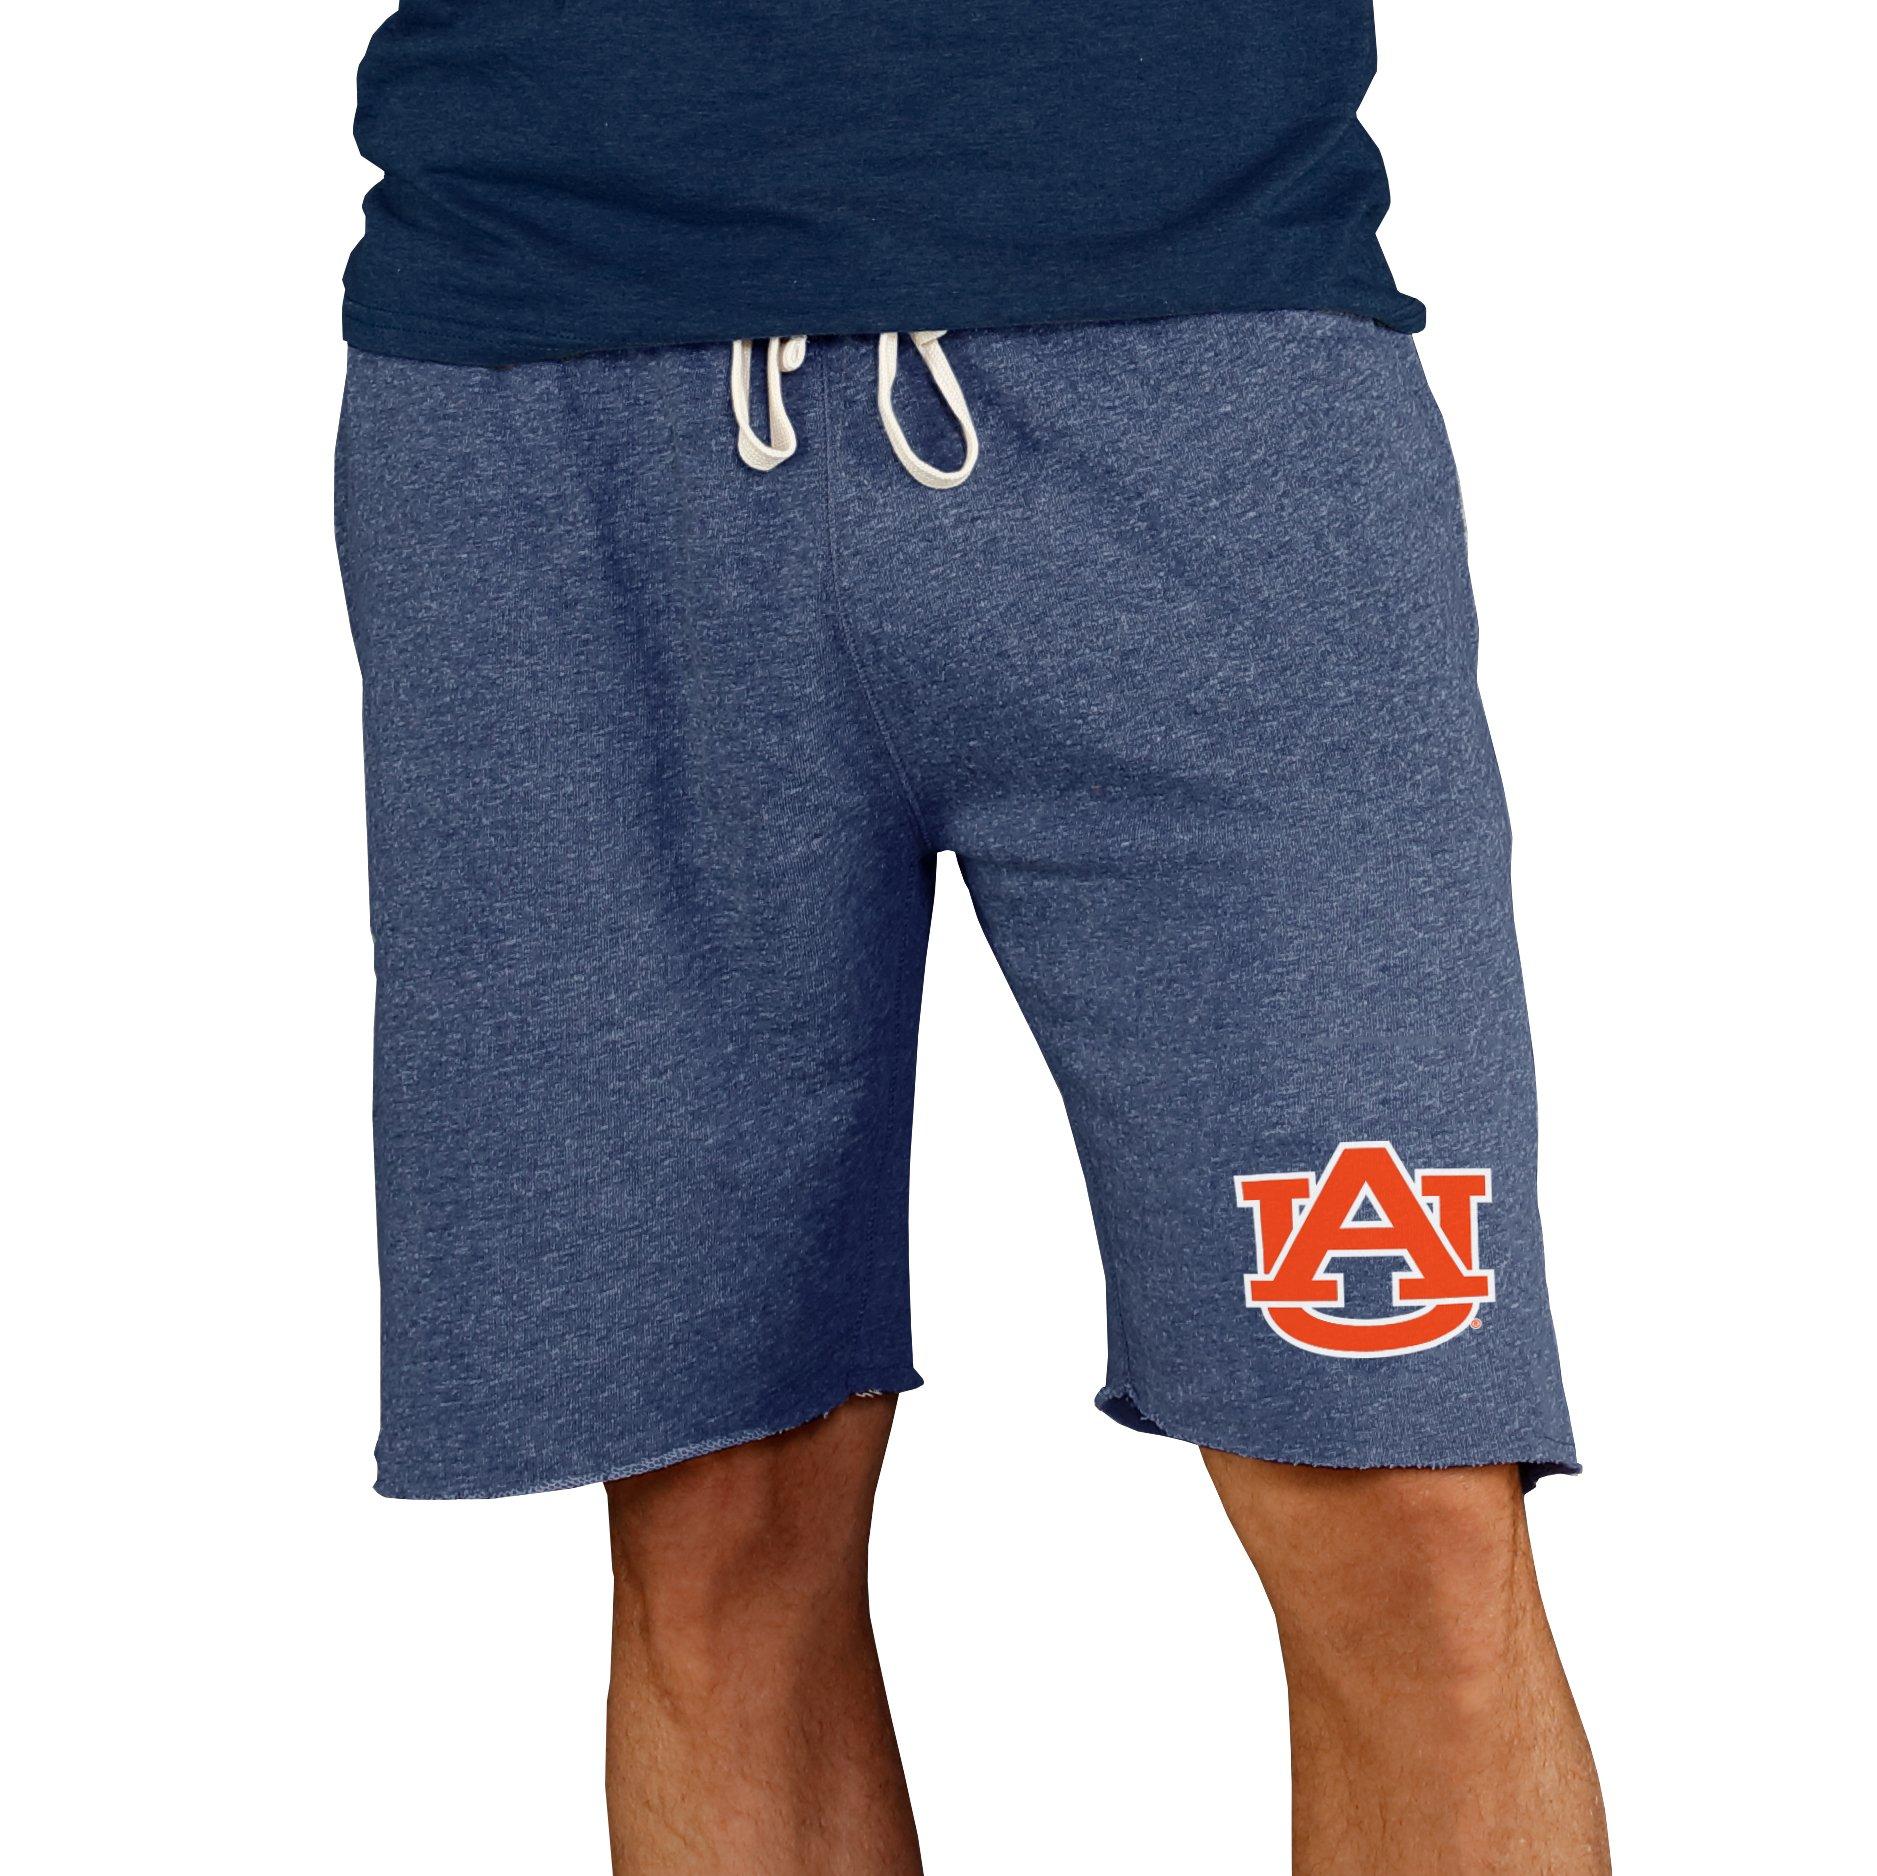 Women's Under Armour Auburn Tigers AF Volleyball Shorts Size Small NWT